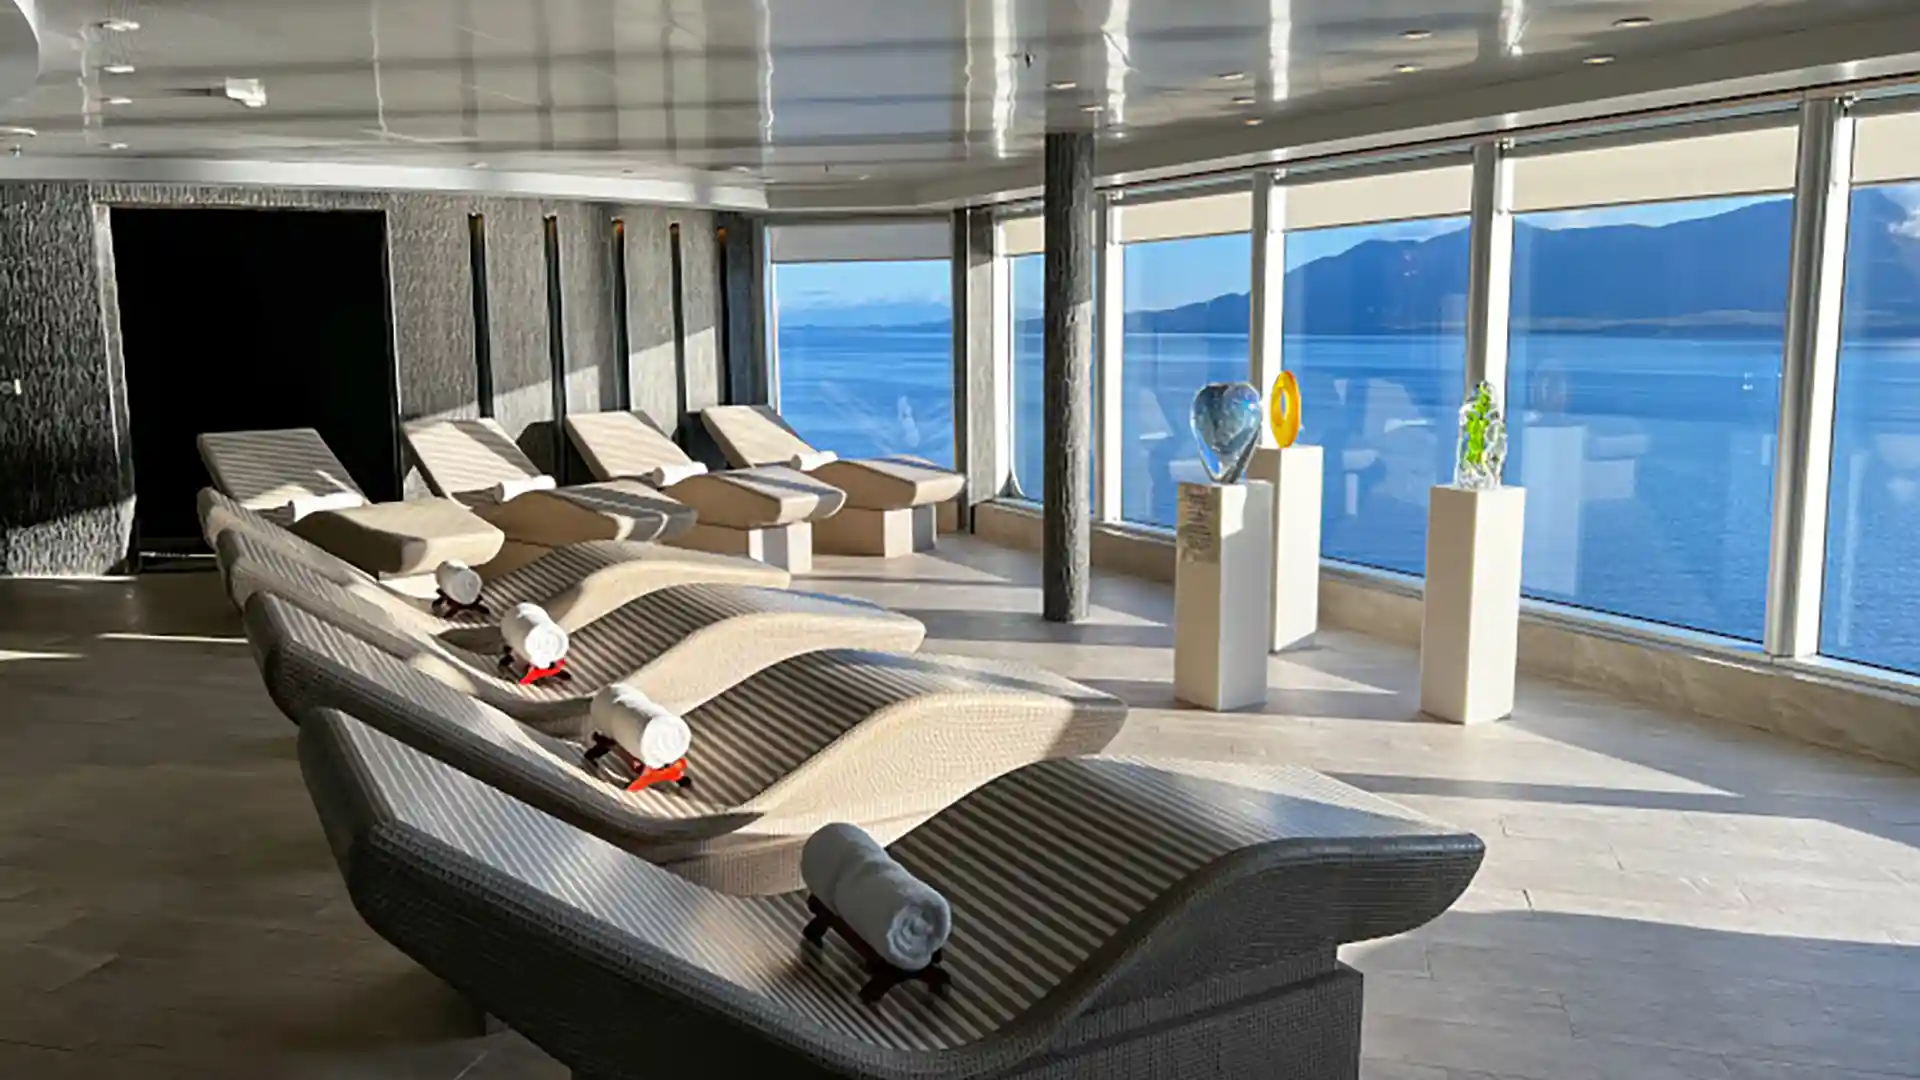 View of loungers with ocean views in thermal suite on Holland America Line ship.